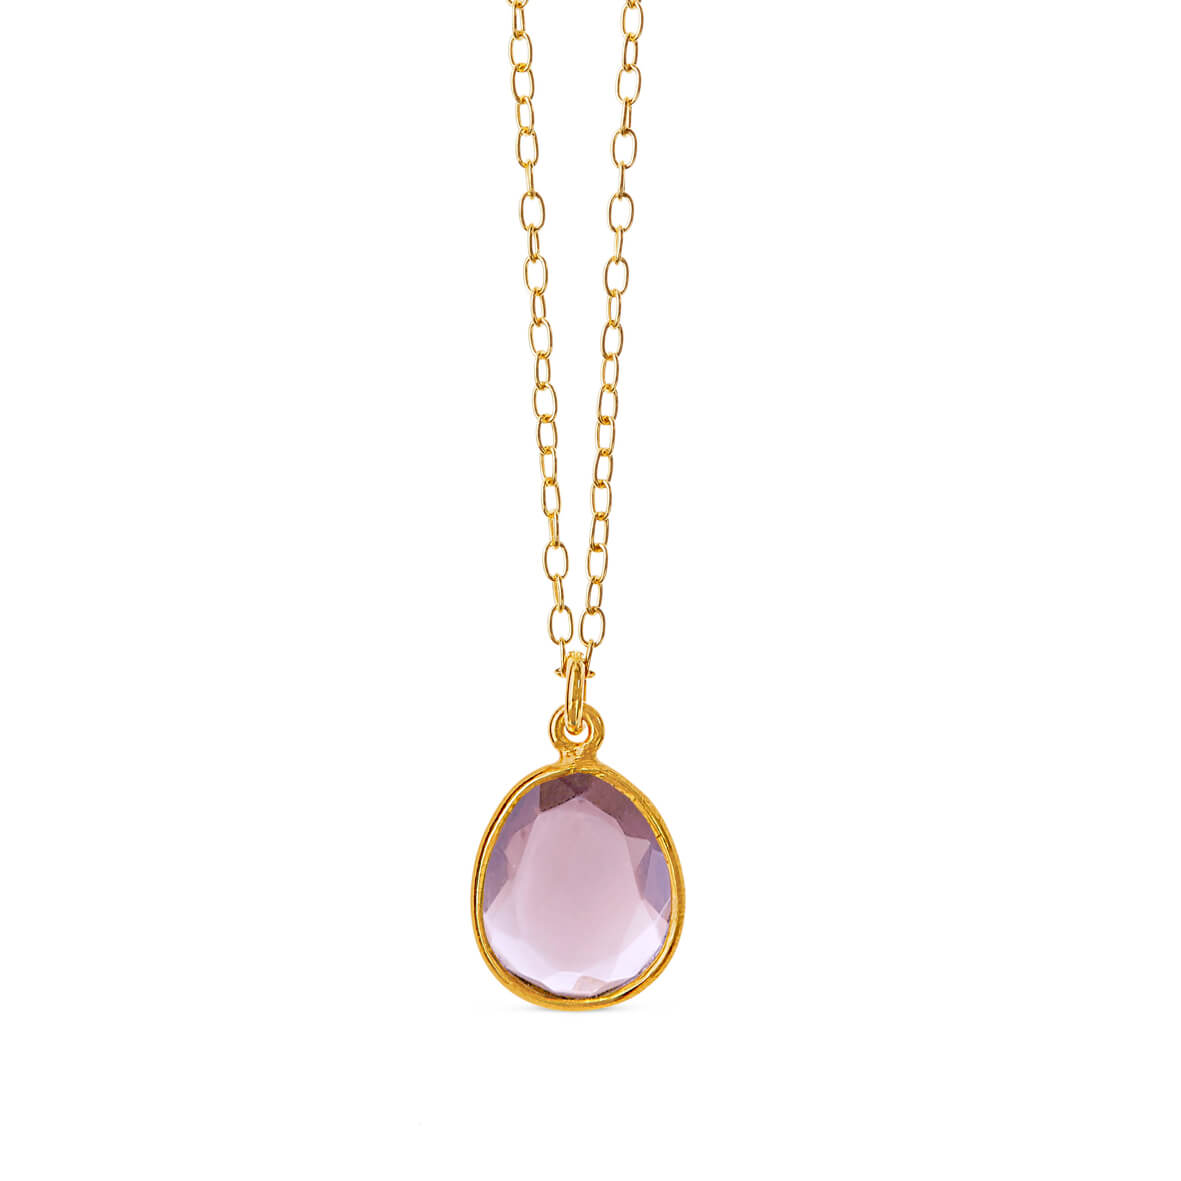 Necklace in gold plated silver with light amethyst / 1816-2-198